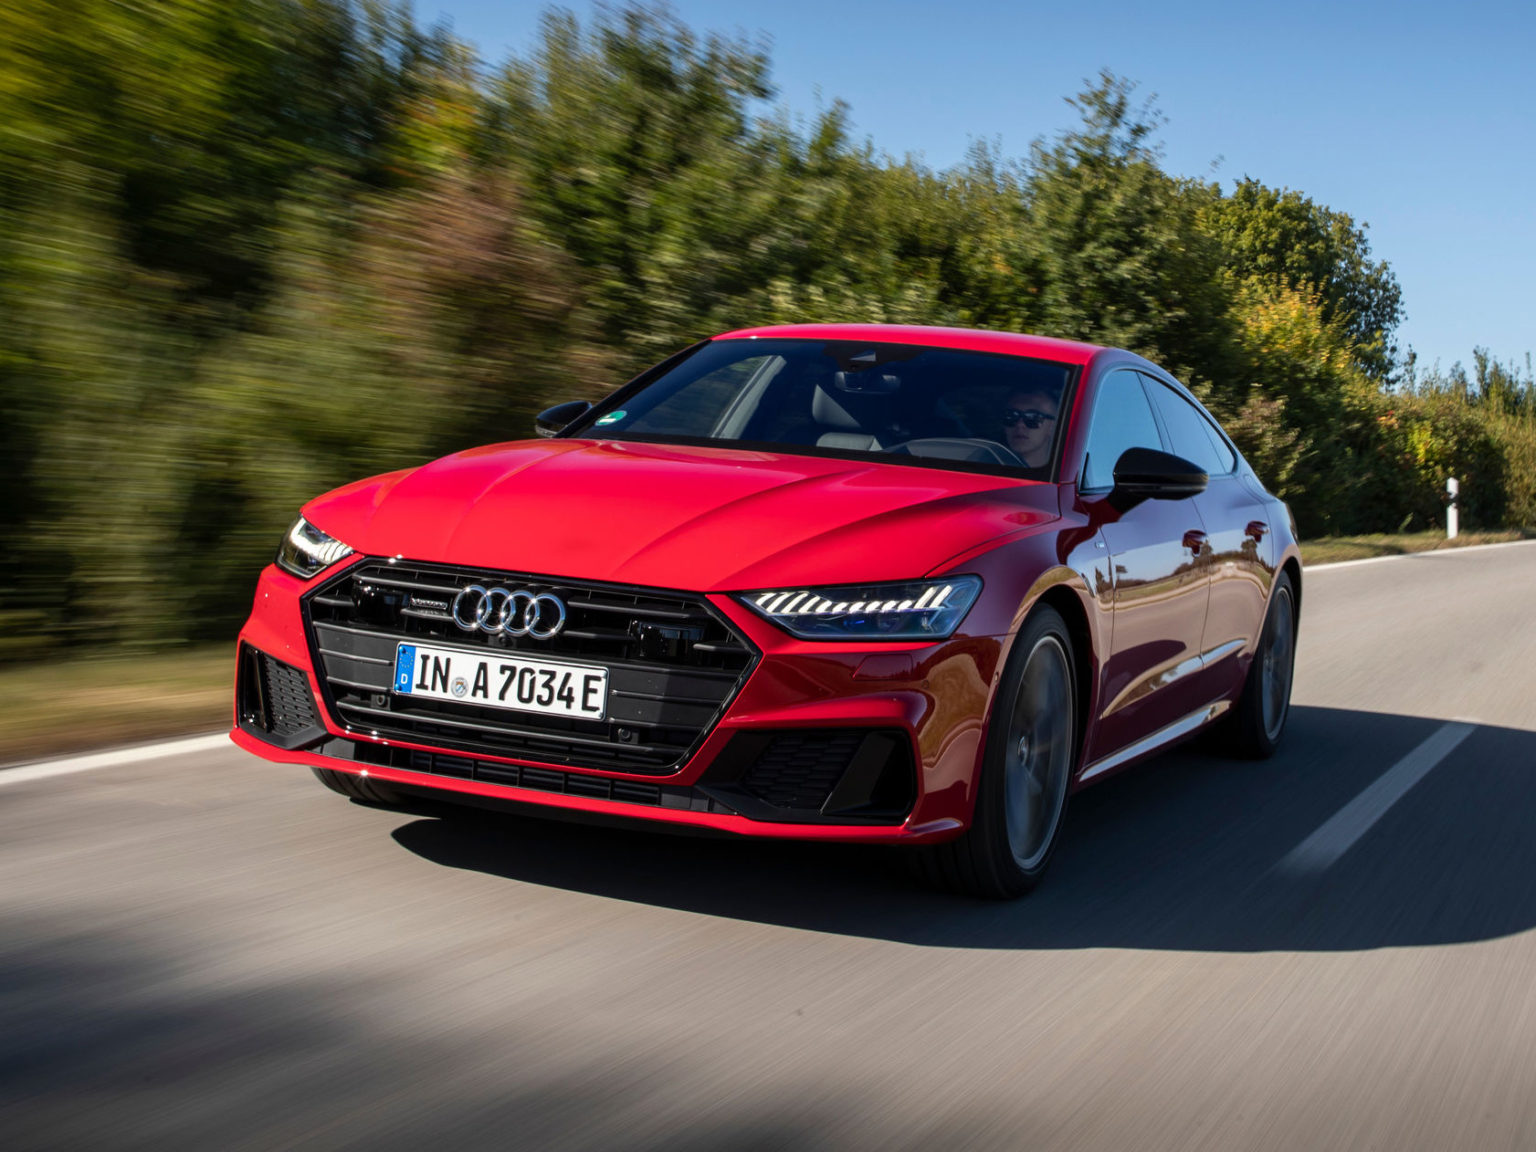 The Audi A7 will be available later this year in a plug-in hybrid format.